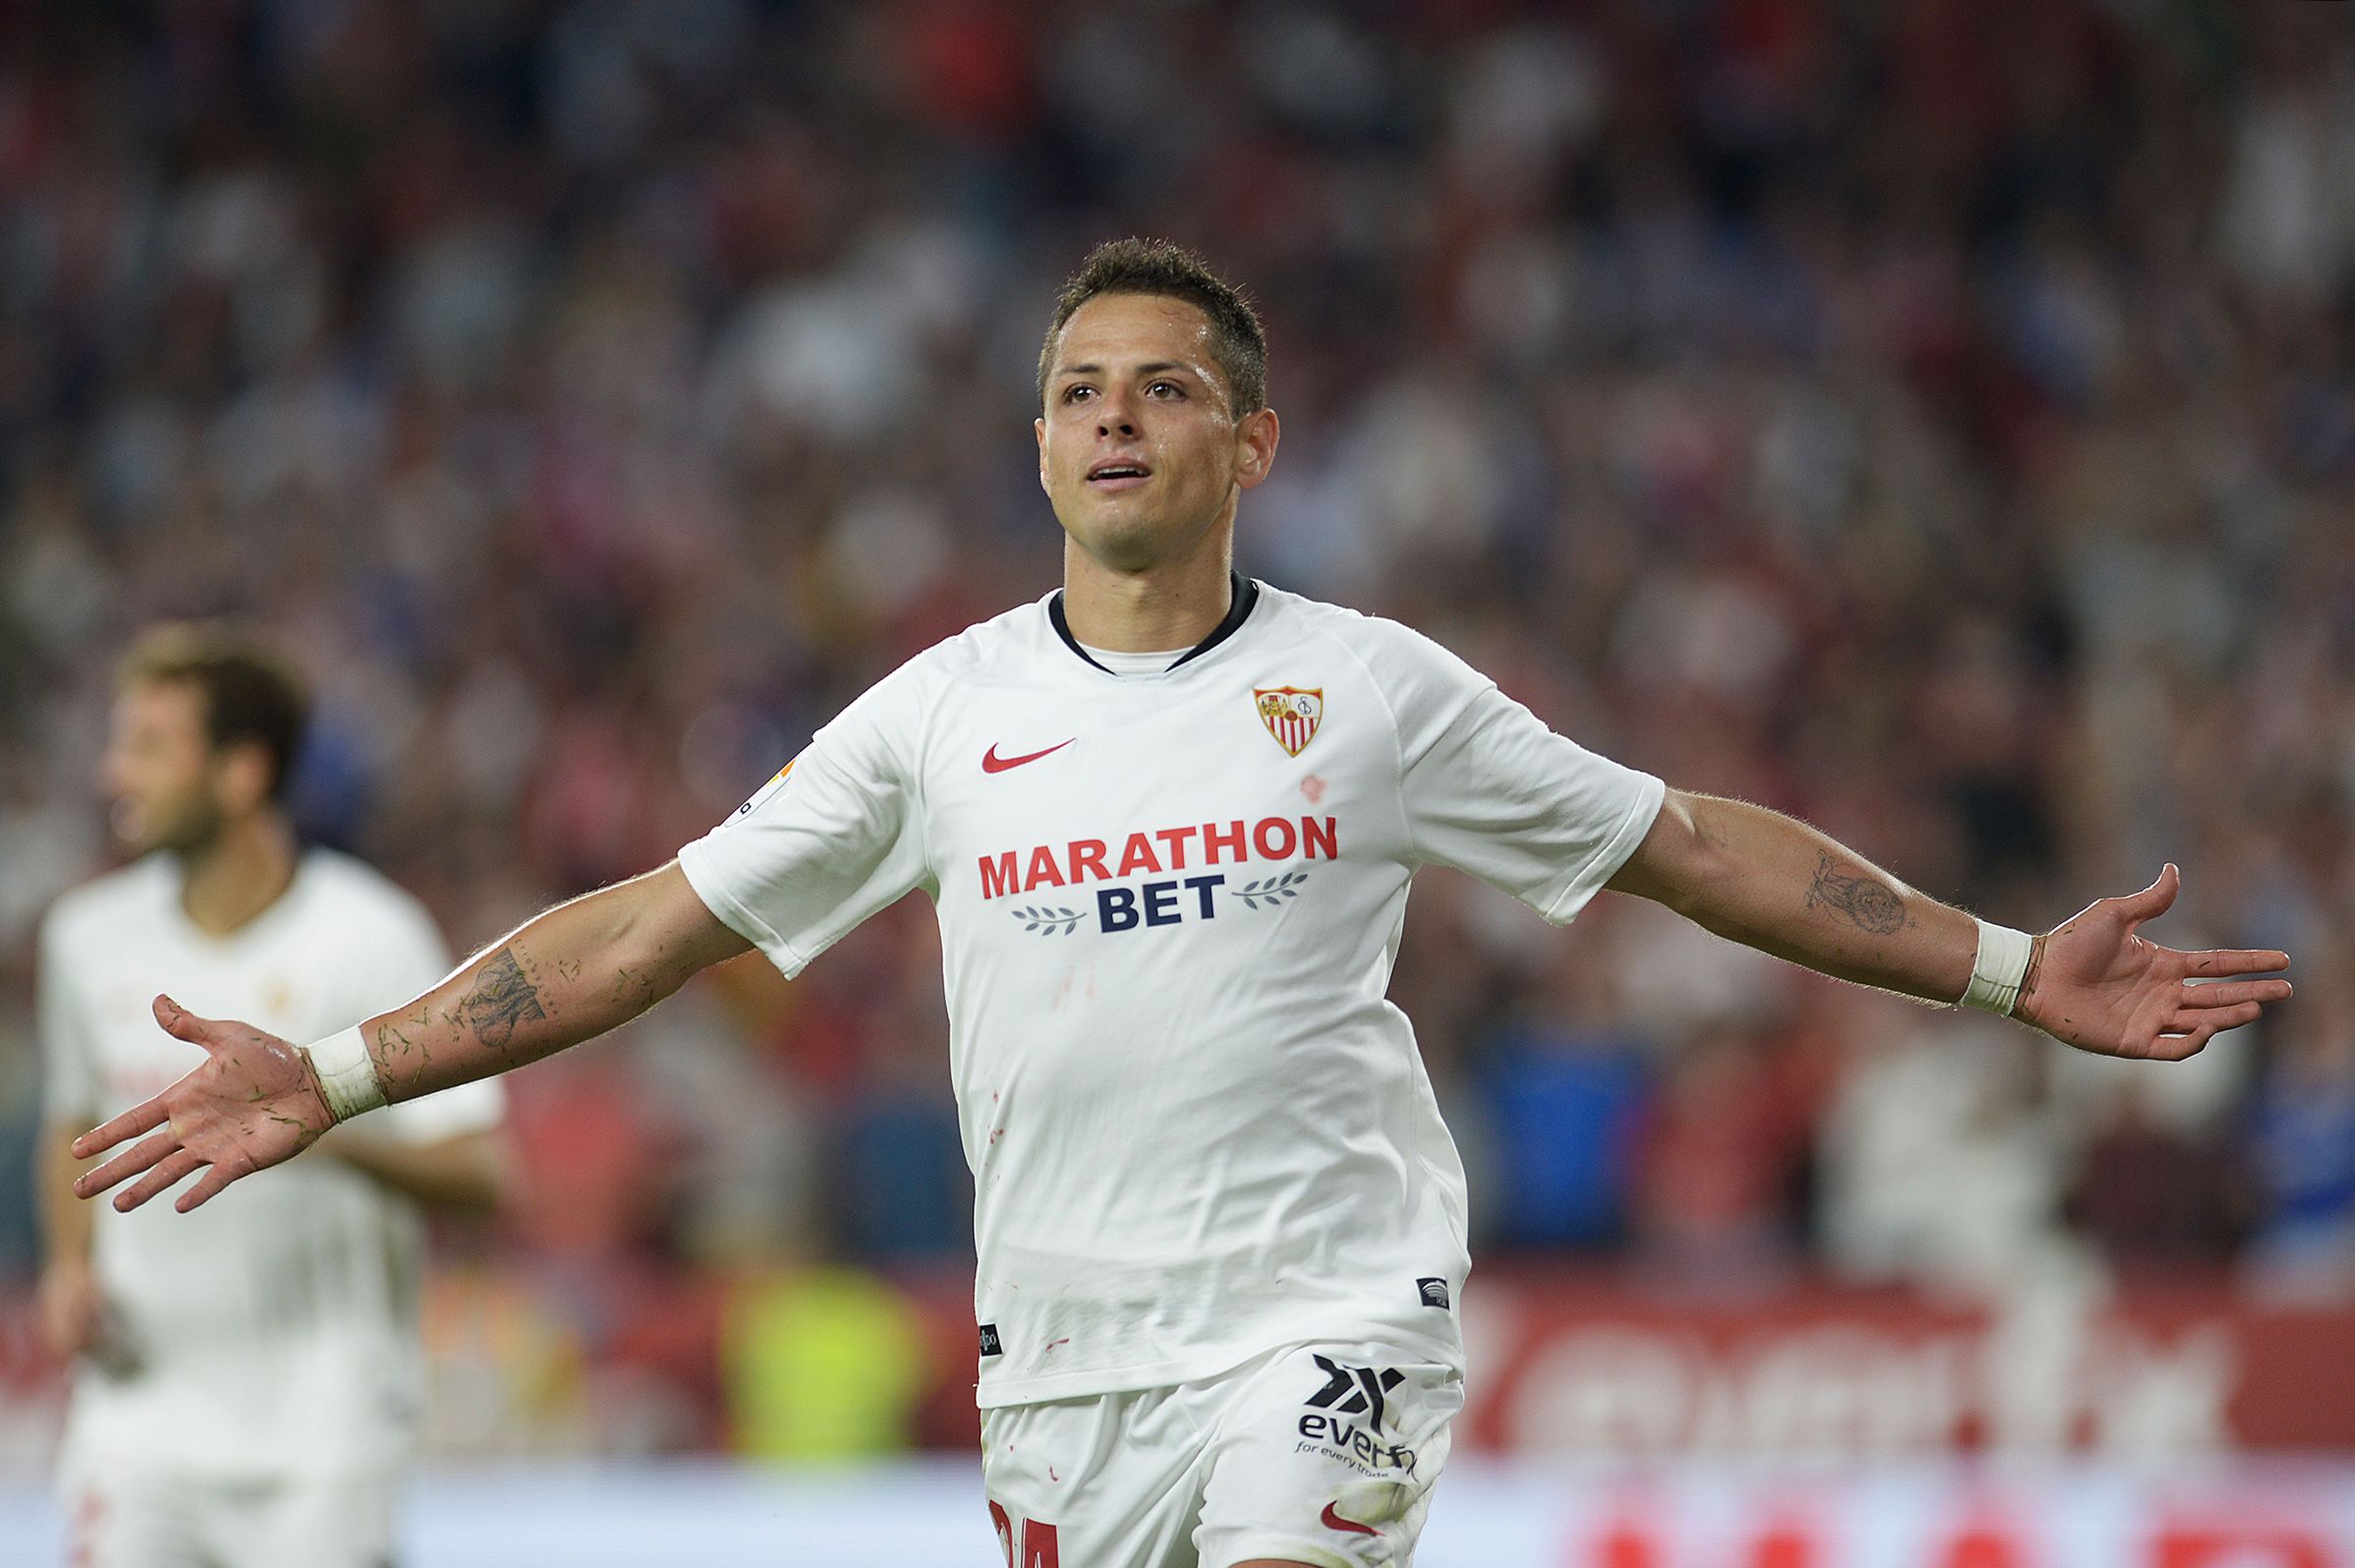 Chicharito focused on team success, not personal accolades - LAG